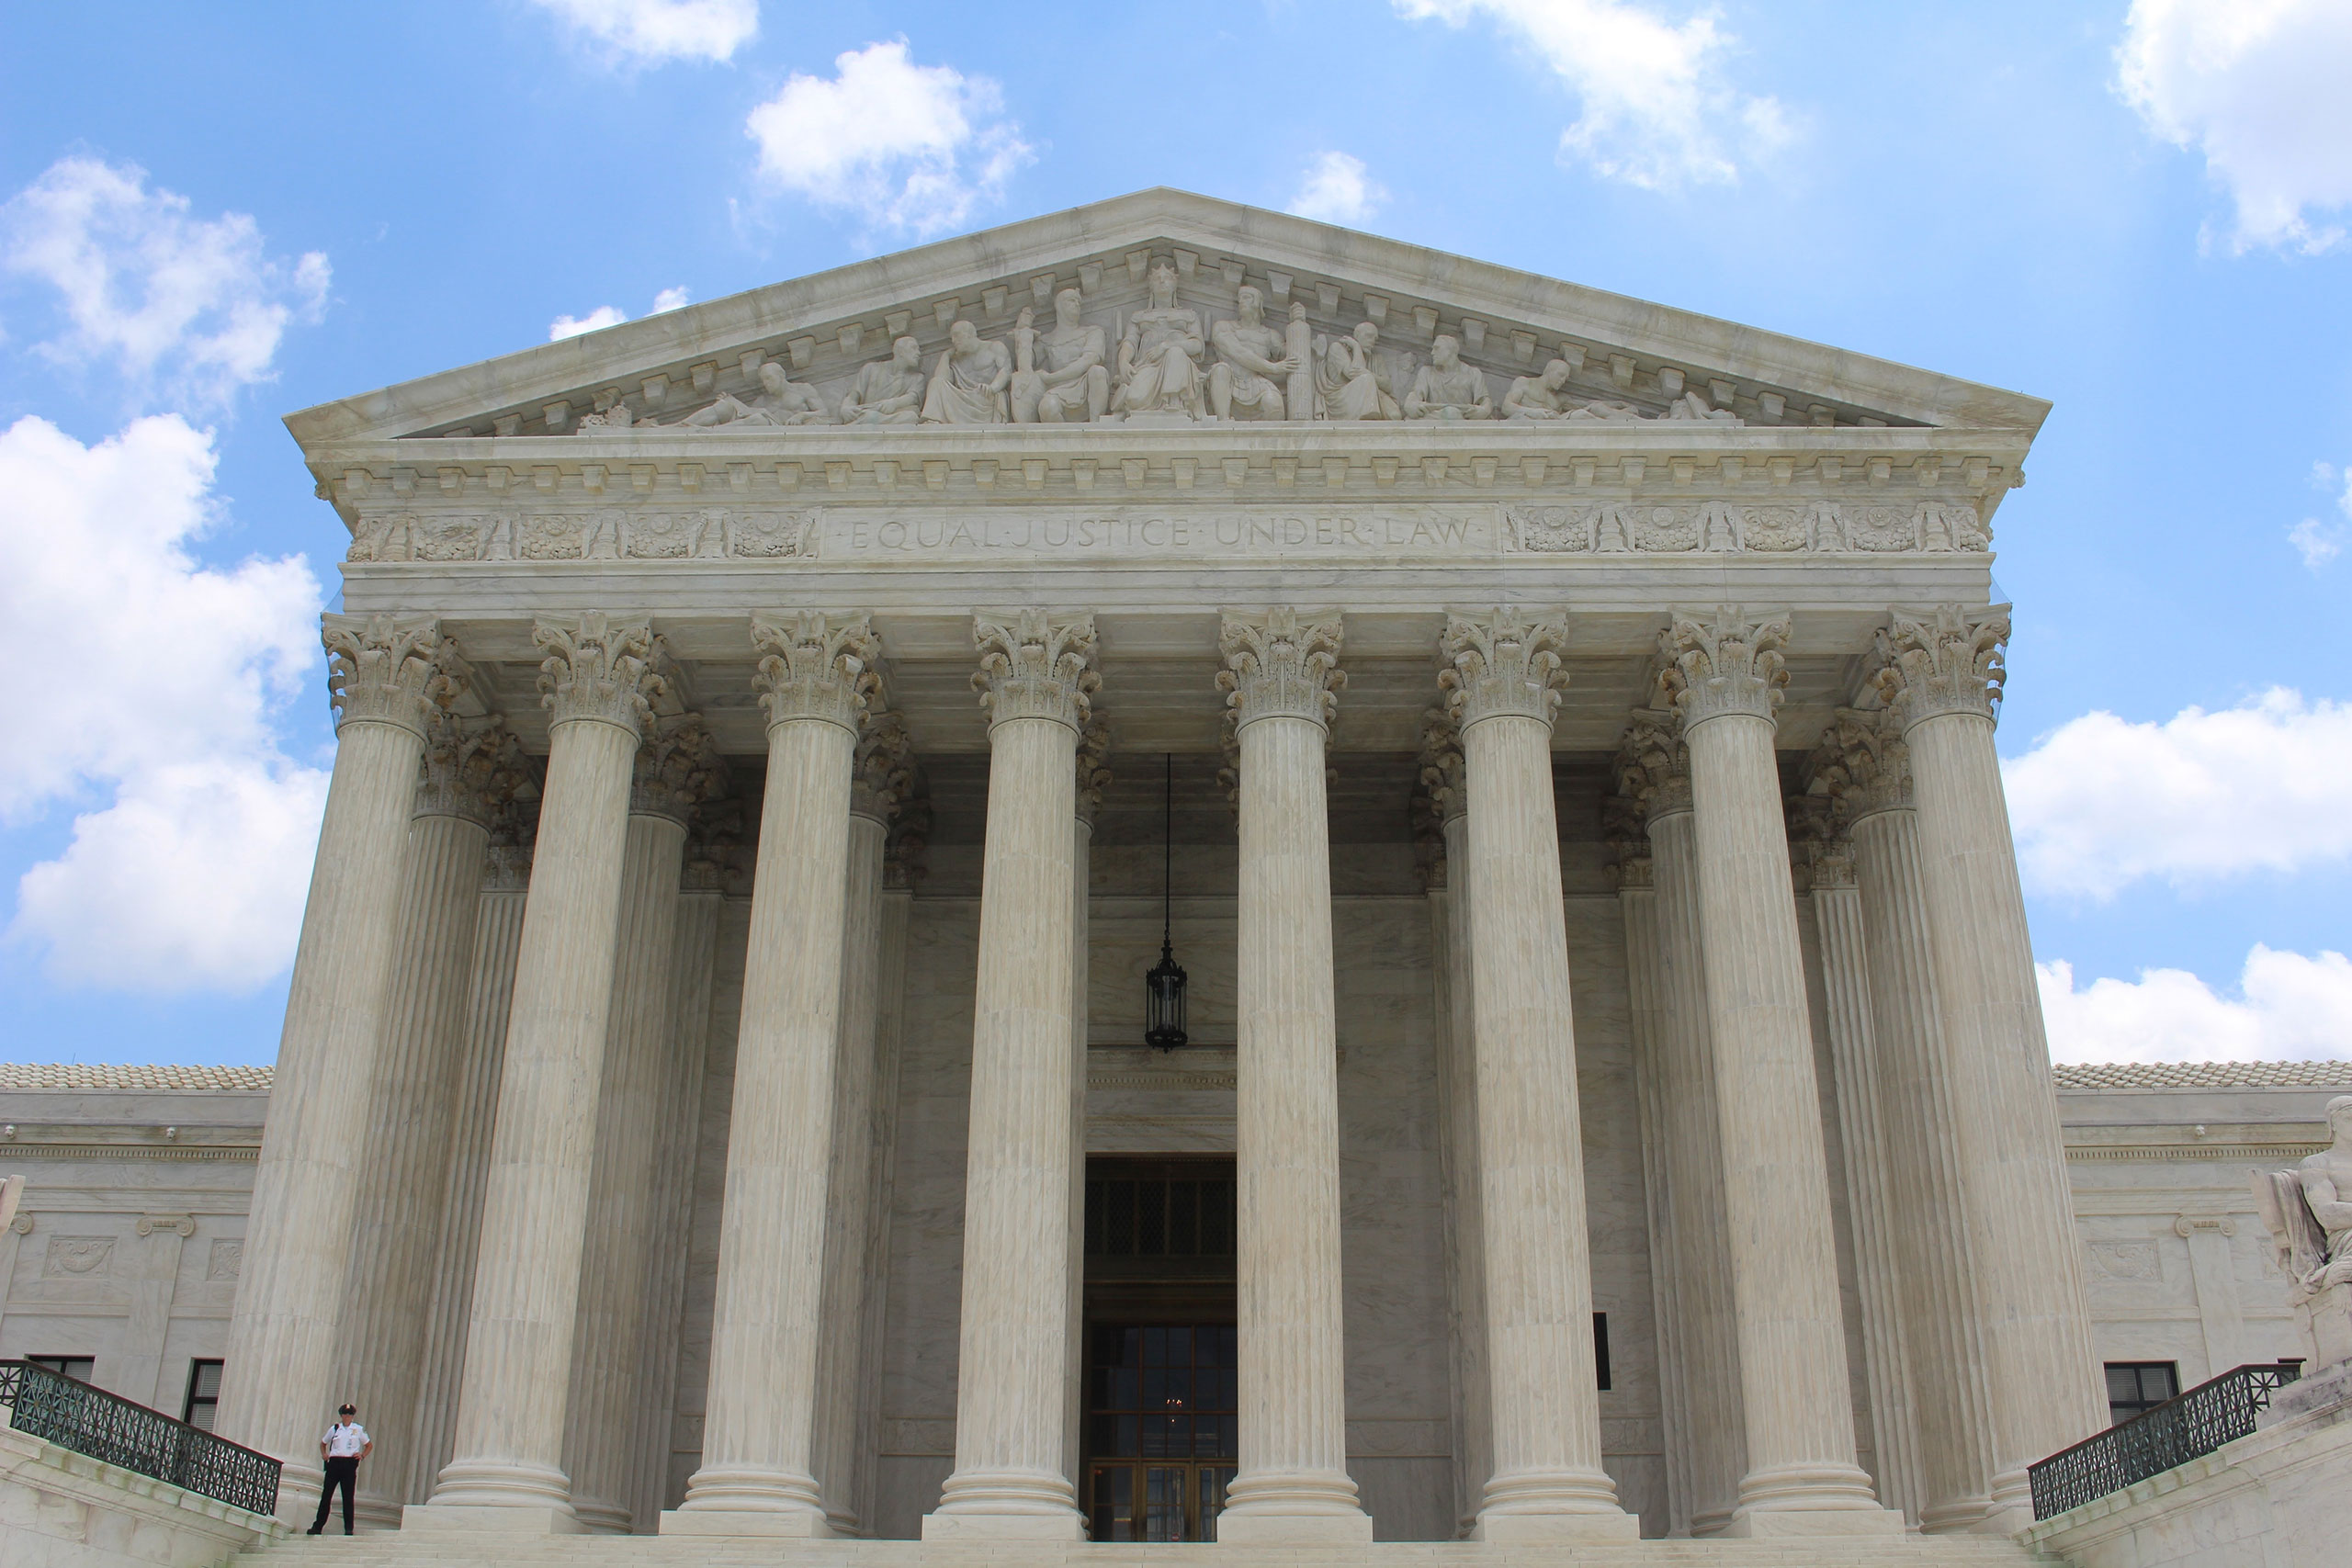 Exterior of the United States Supreme Court in Washington, D.C.